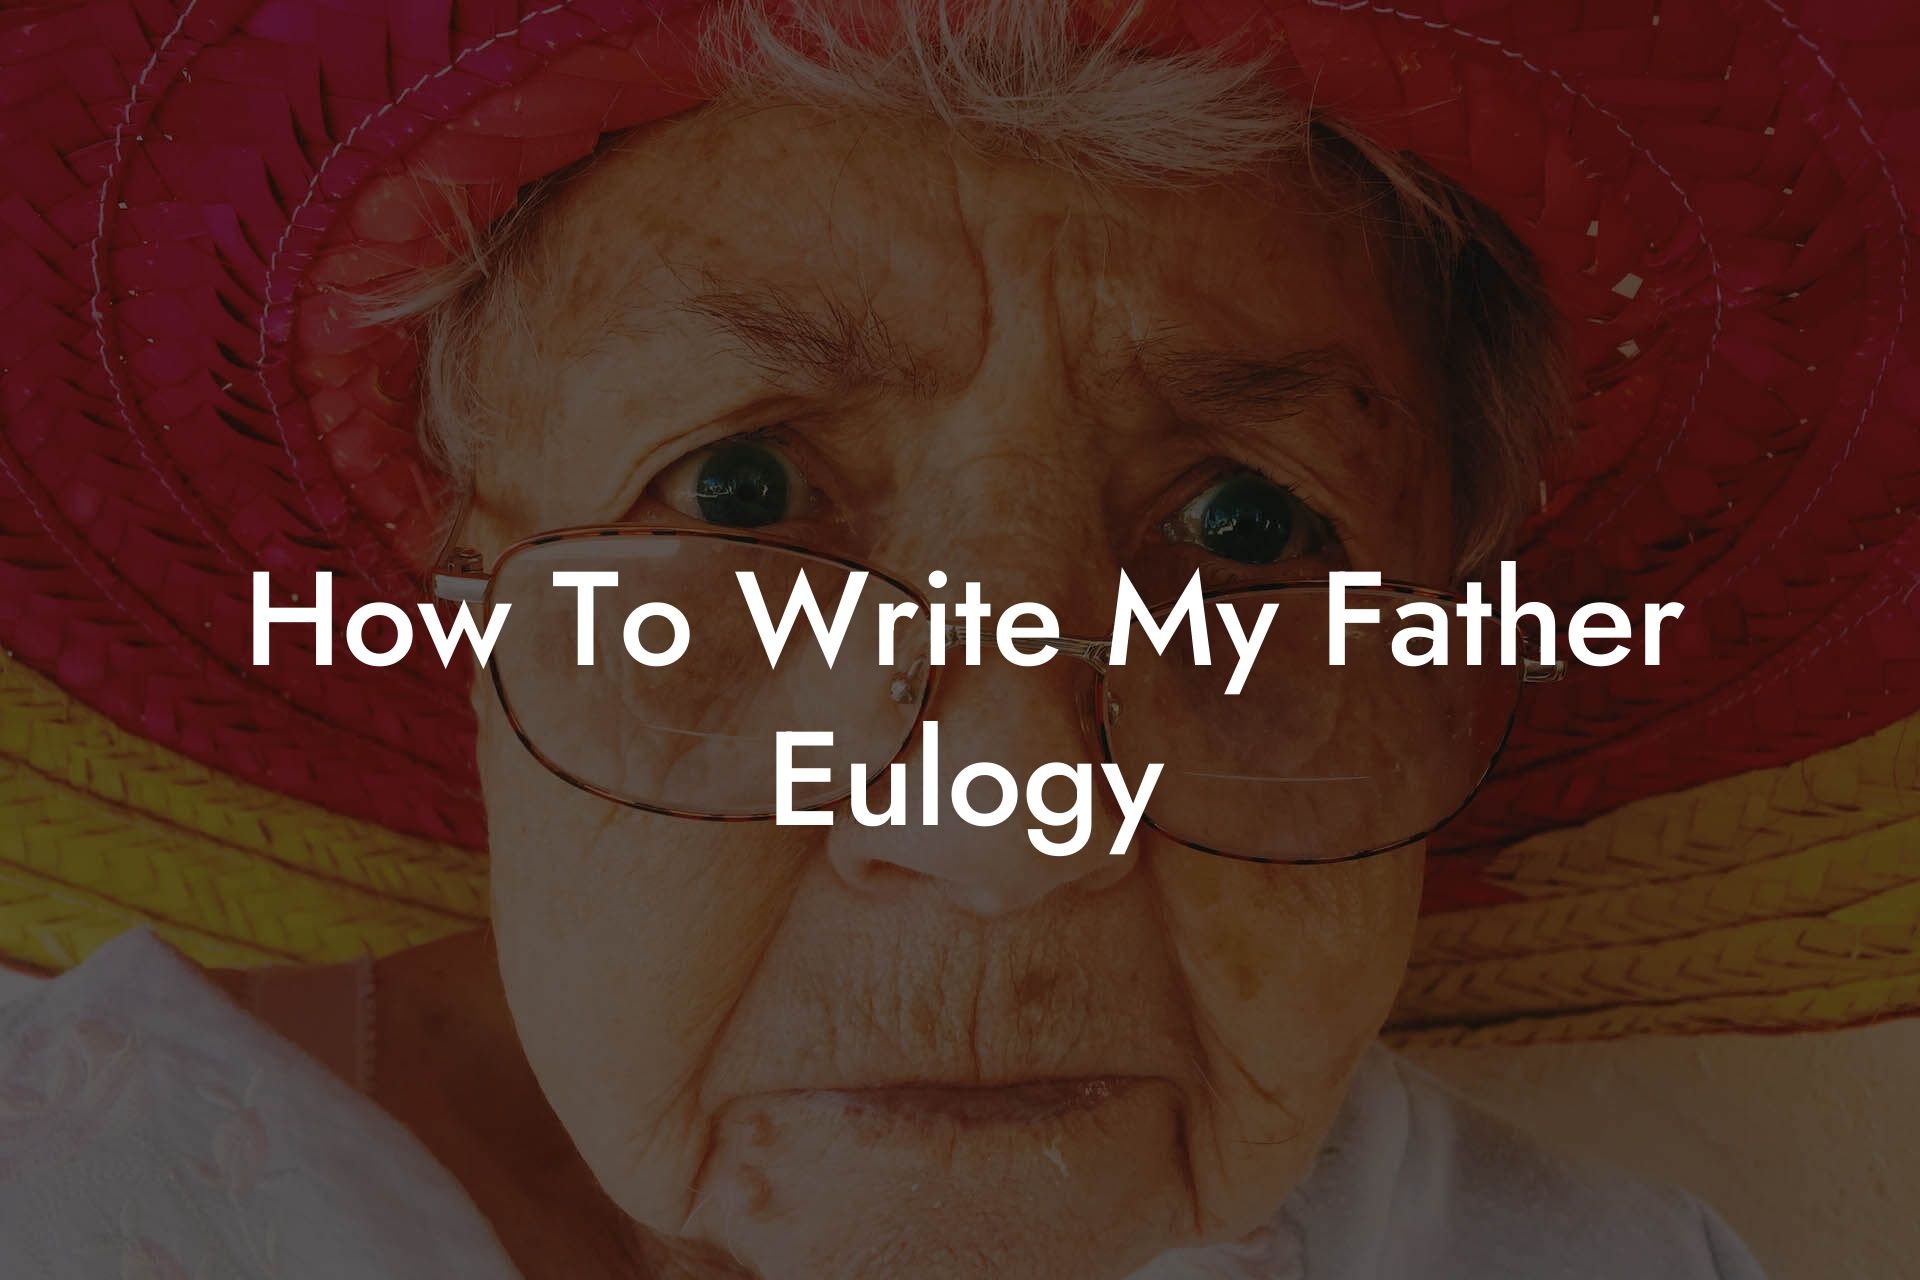 How To Write My Father Eulogy